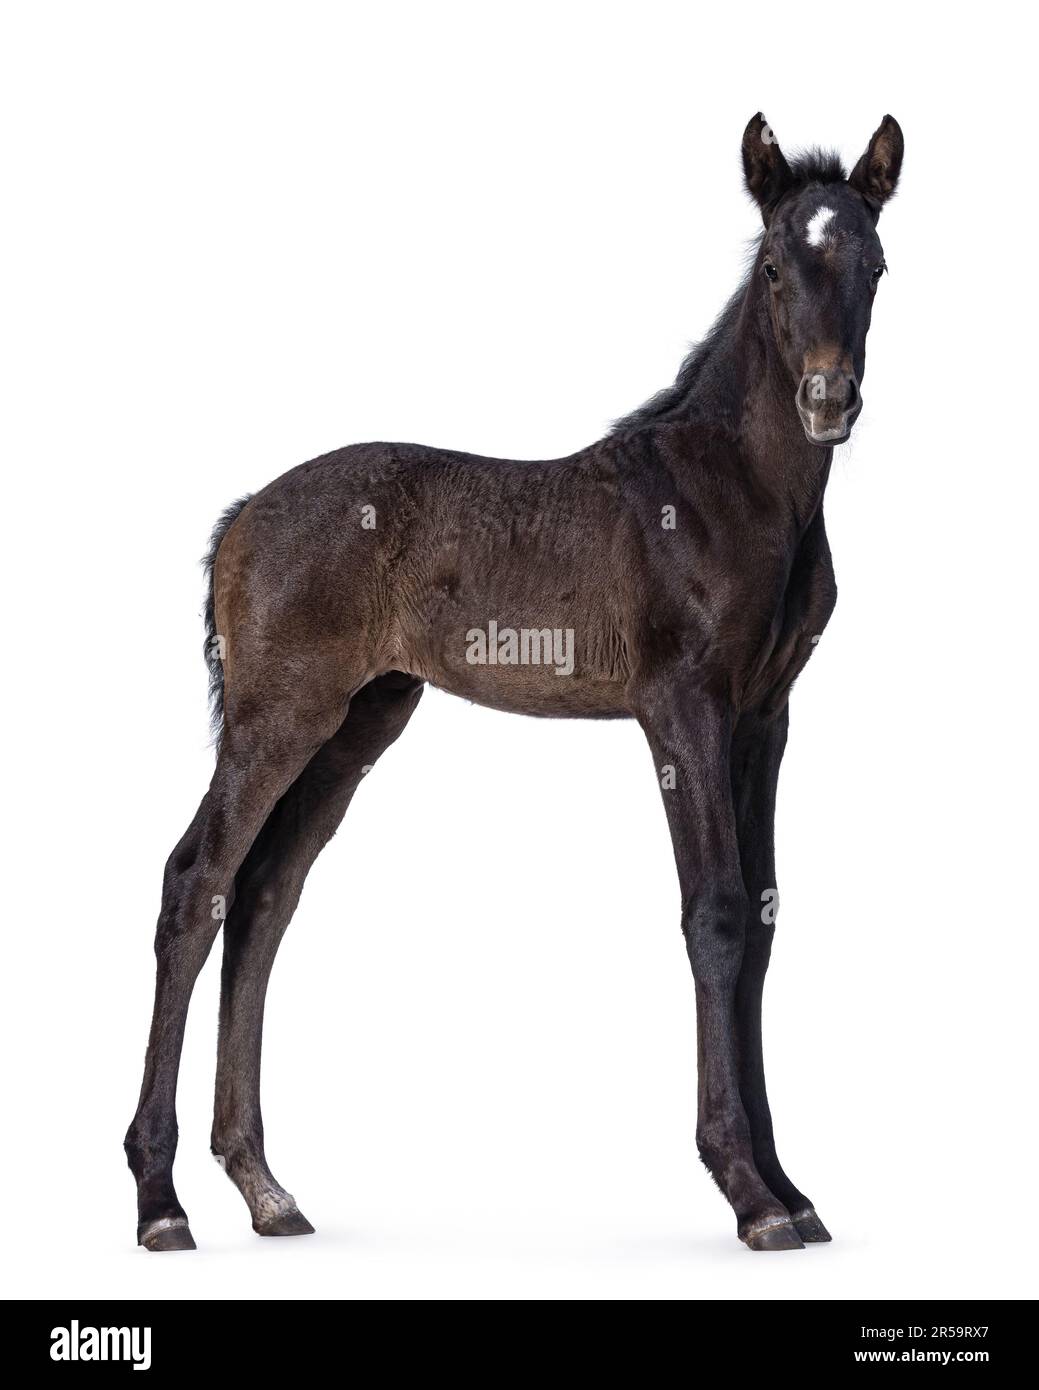 1 Month old dark brown Andalusian horse aka pura raza espanola, standing side ways. Looking towards camera. Isolated on a white background. Stock Photo